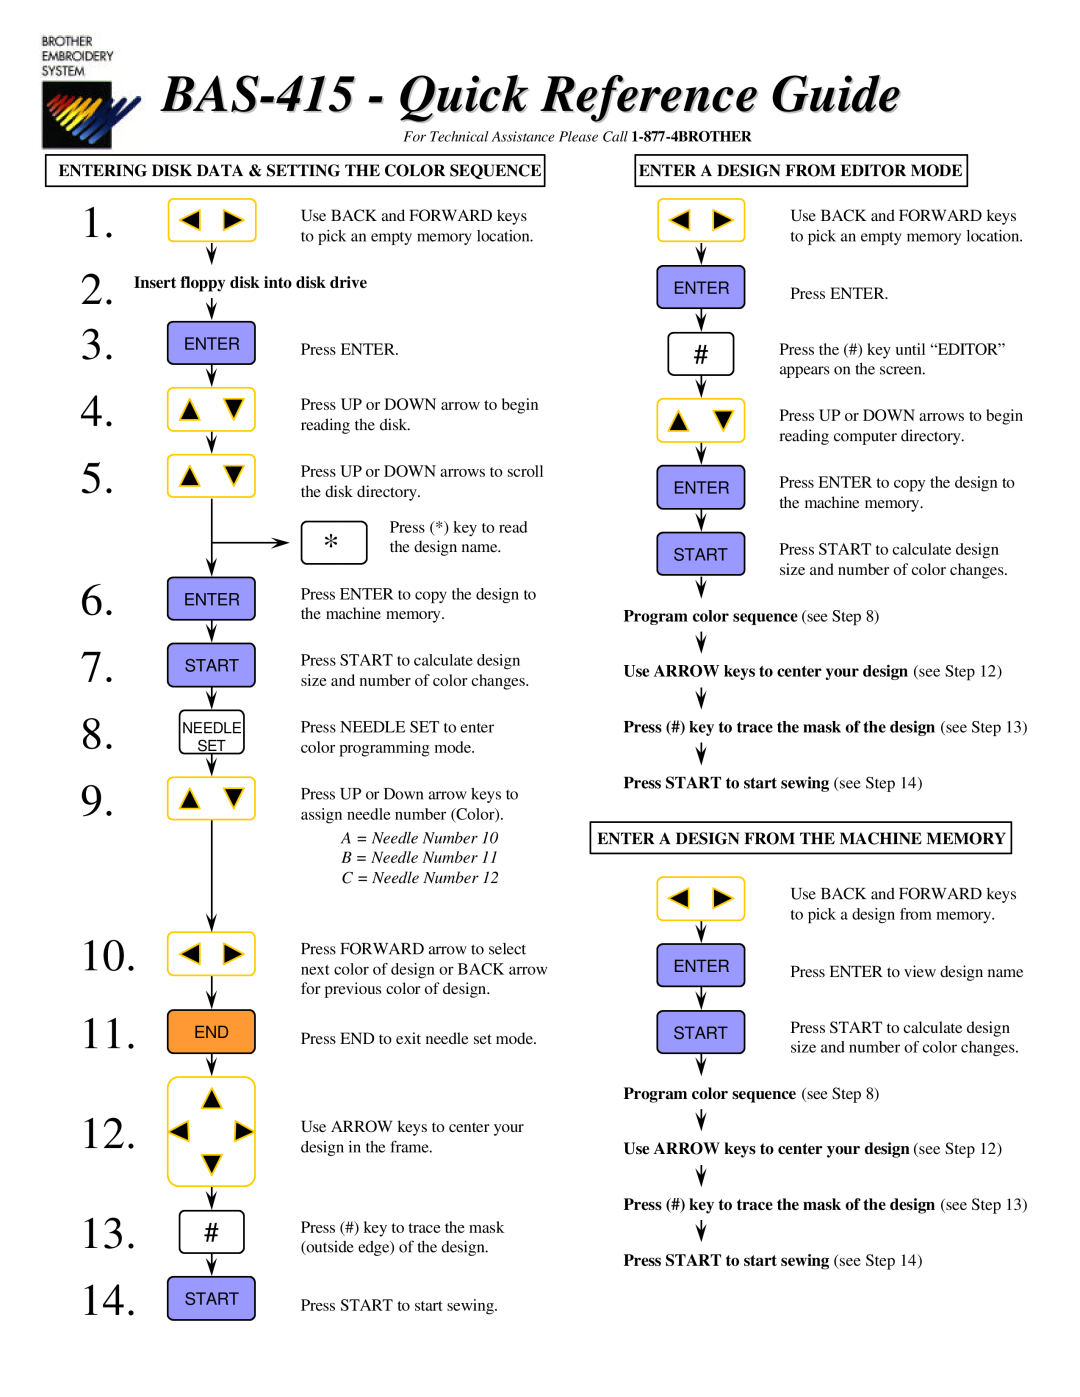 Brother manual BAS-415 - Quick Reference Guide, A = Needle Number, B = Needle Number, C = Needle Number 